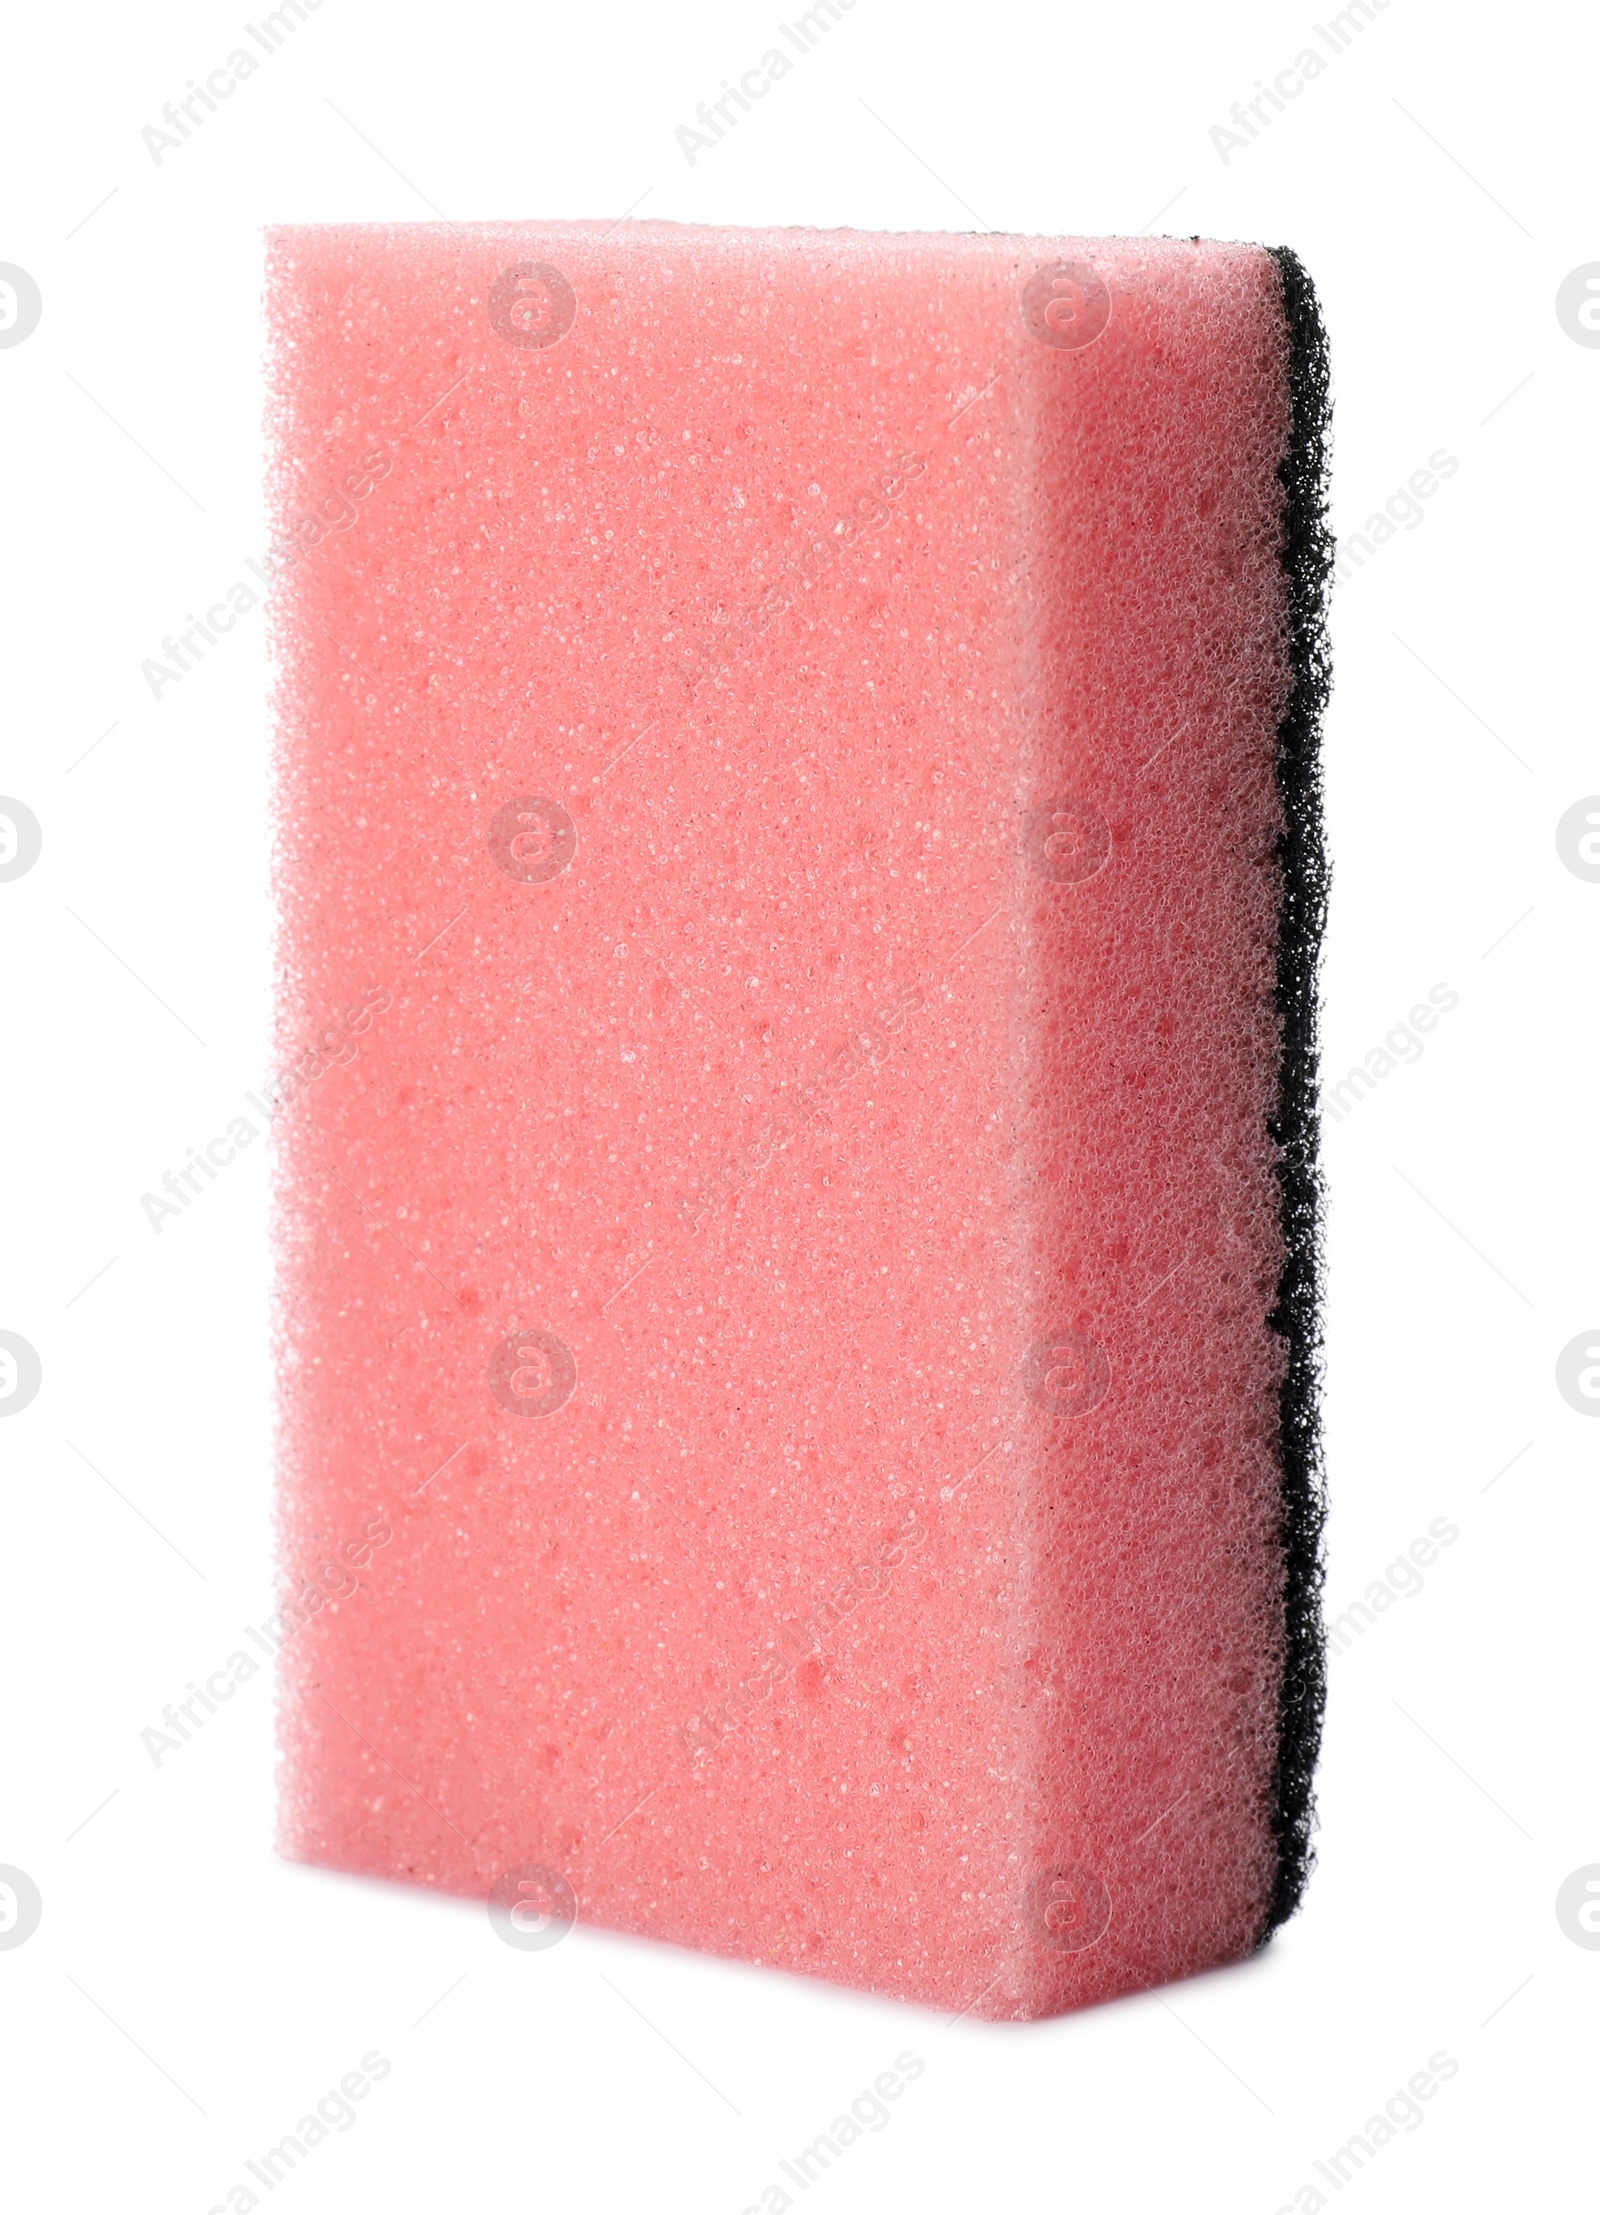 Photo of Pink cleaning sponge with abrasive black scourer isolated on white